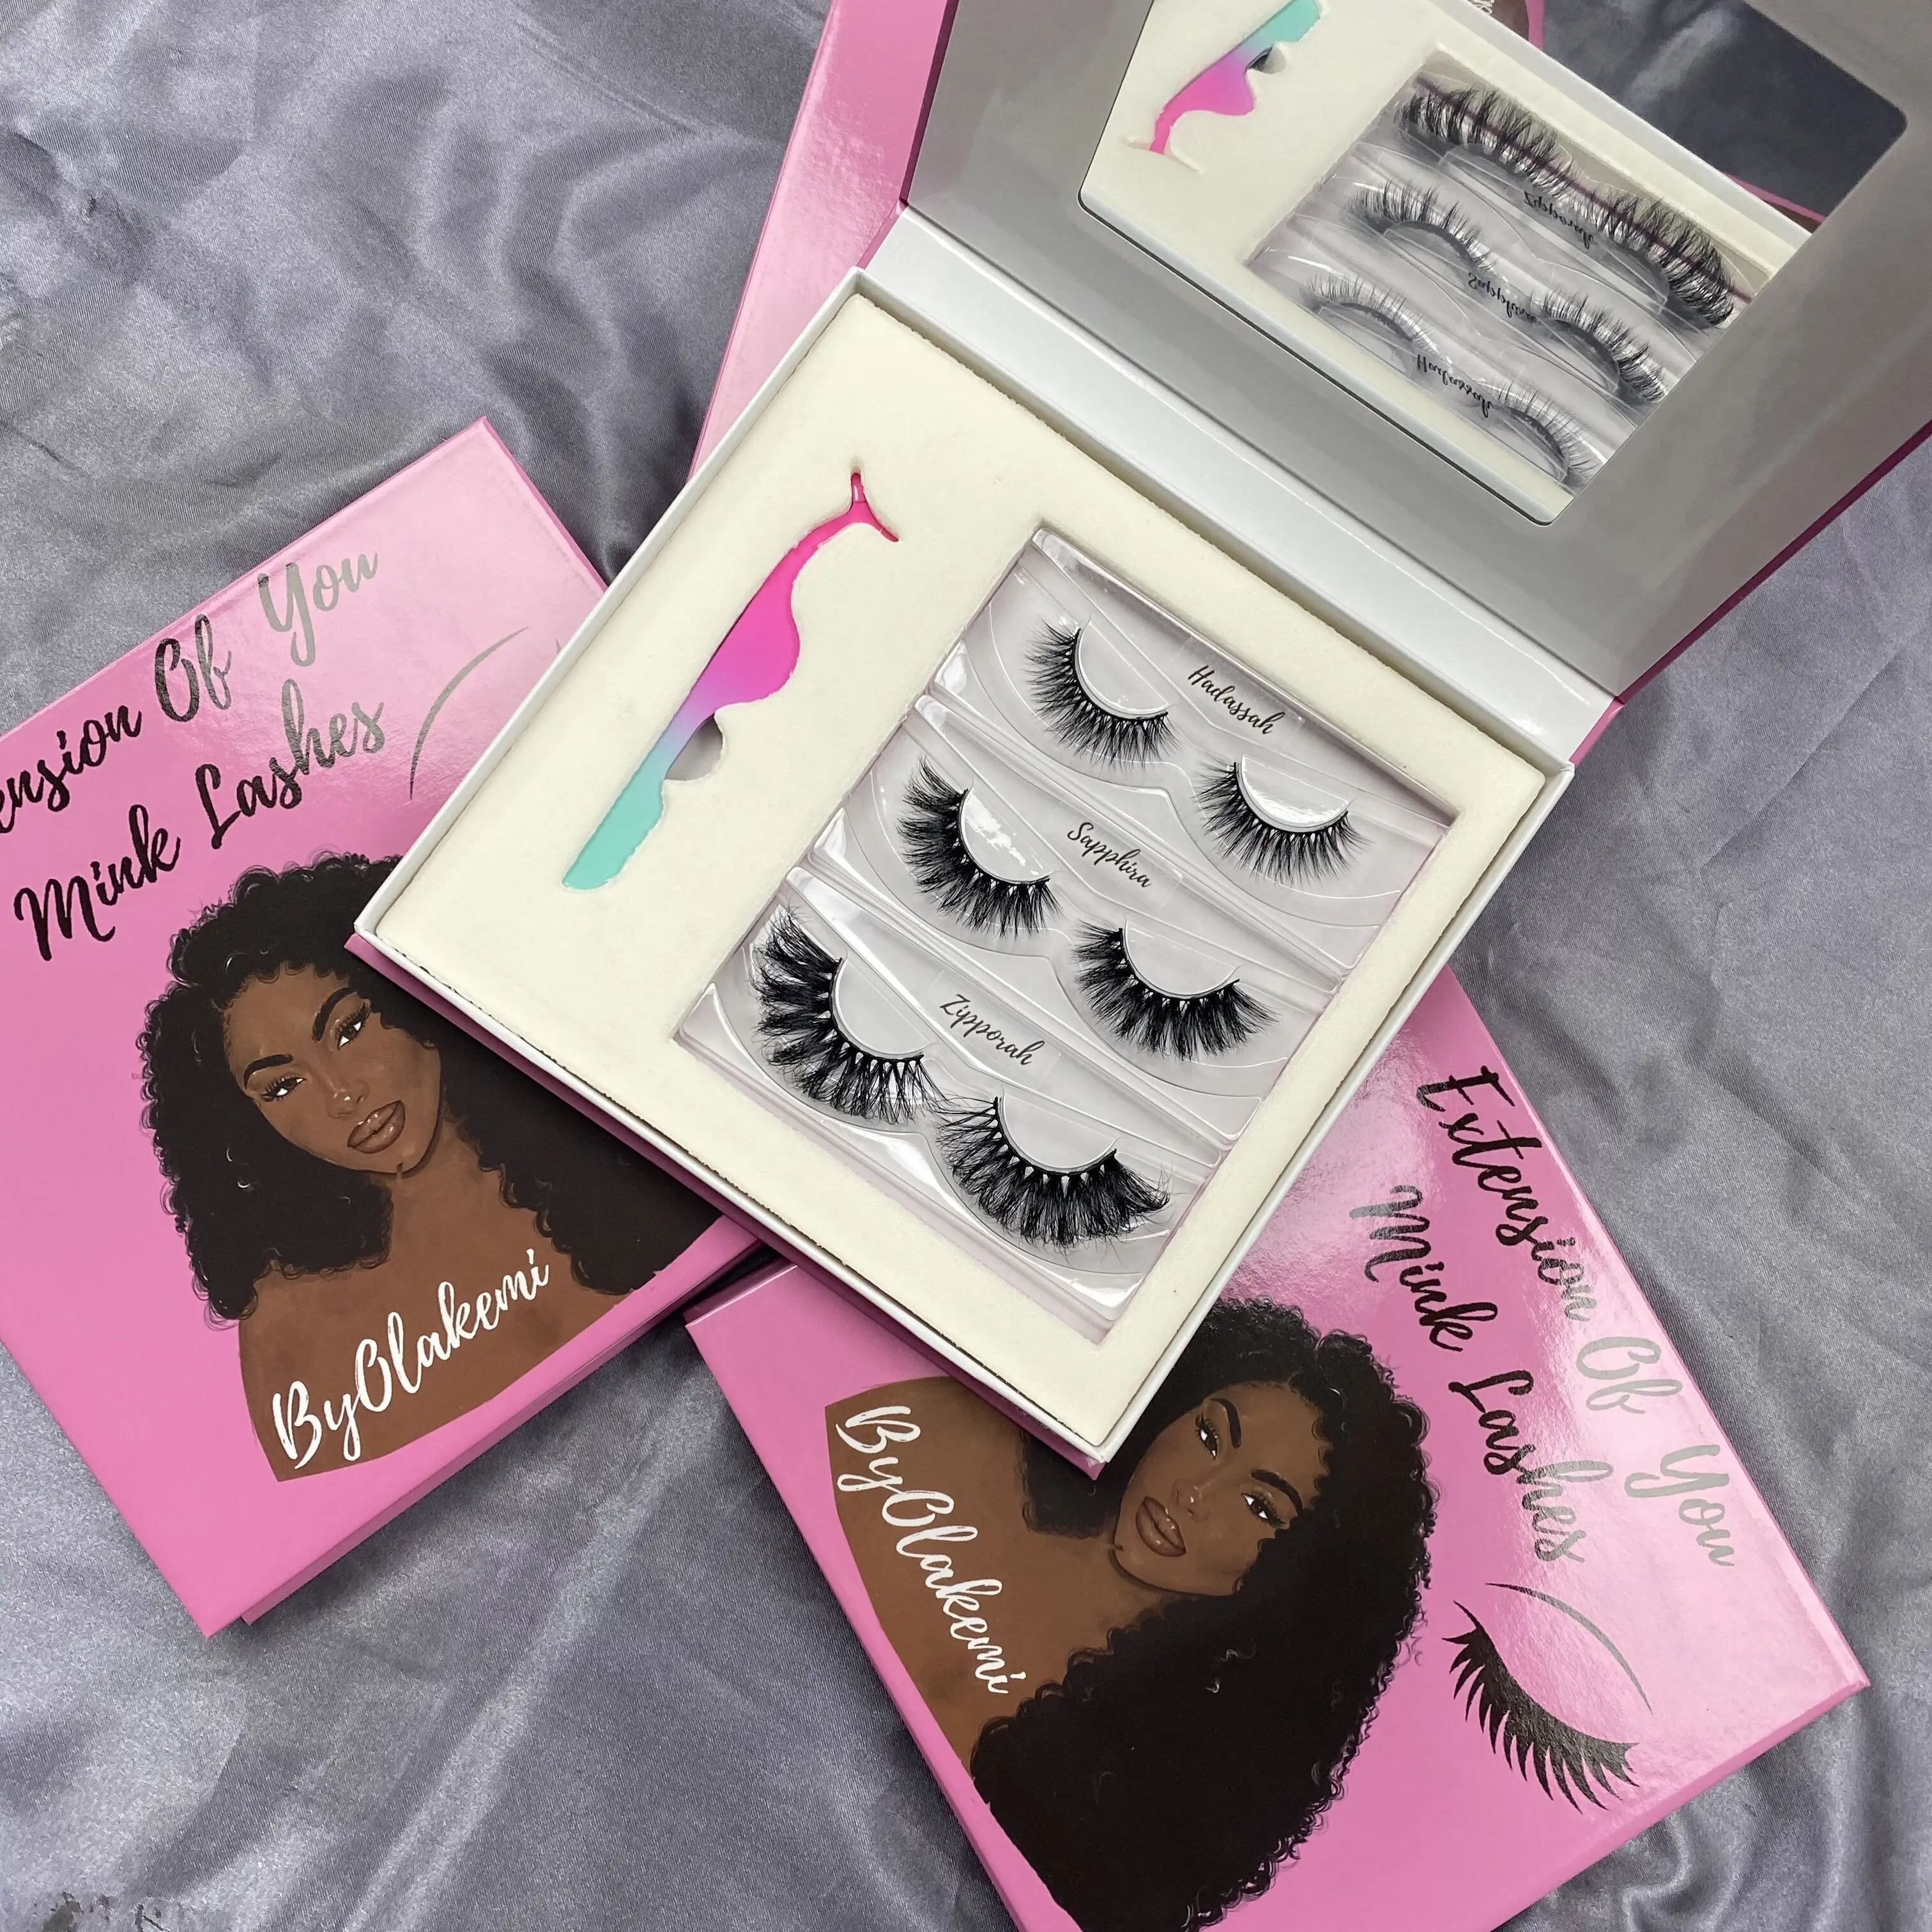 

Cruelty free lashes natural 15mm 3d faux mink eyelashes vendor private label 3 pair eyelash book packaging with mirror